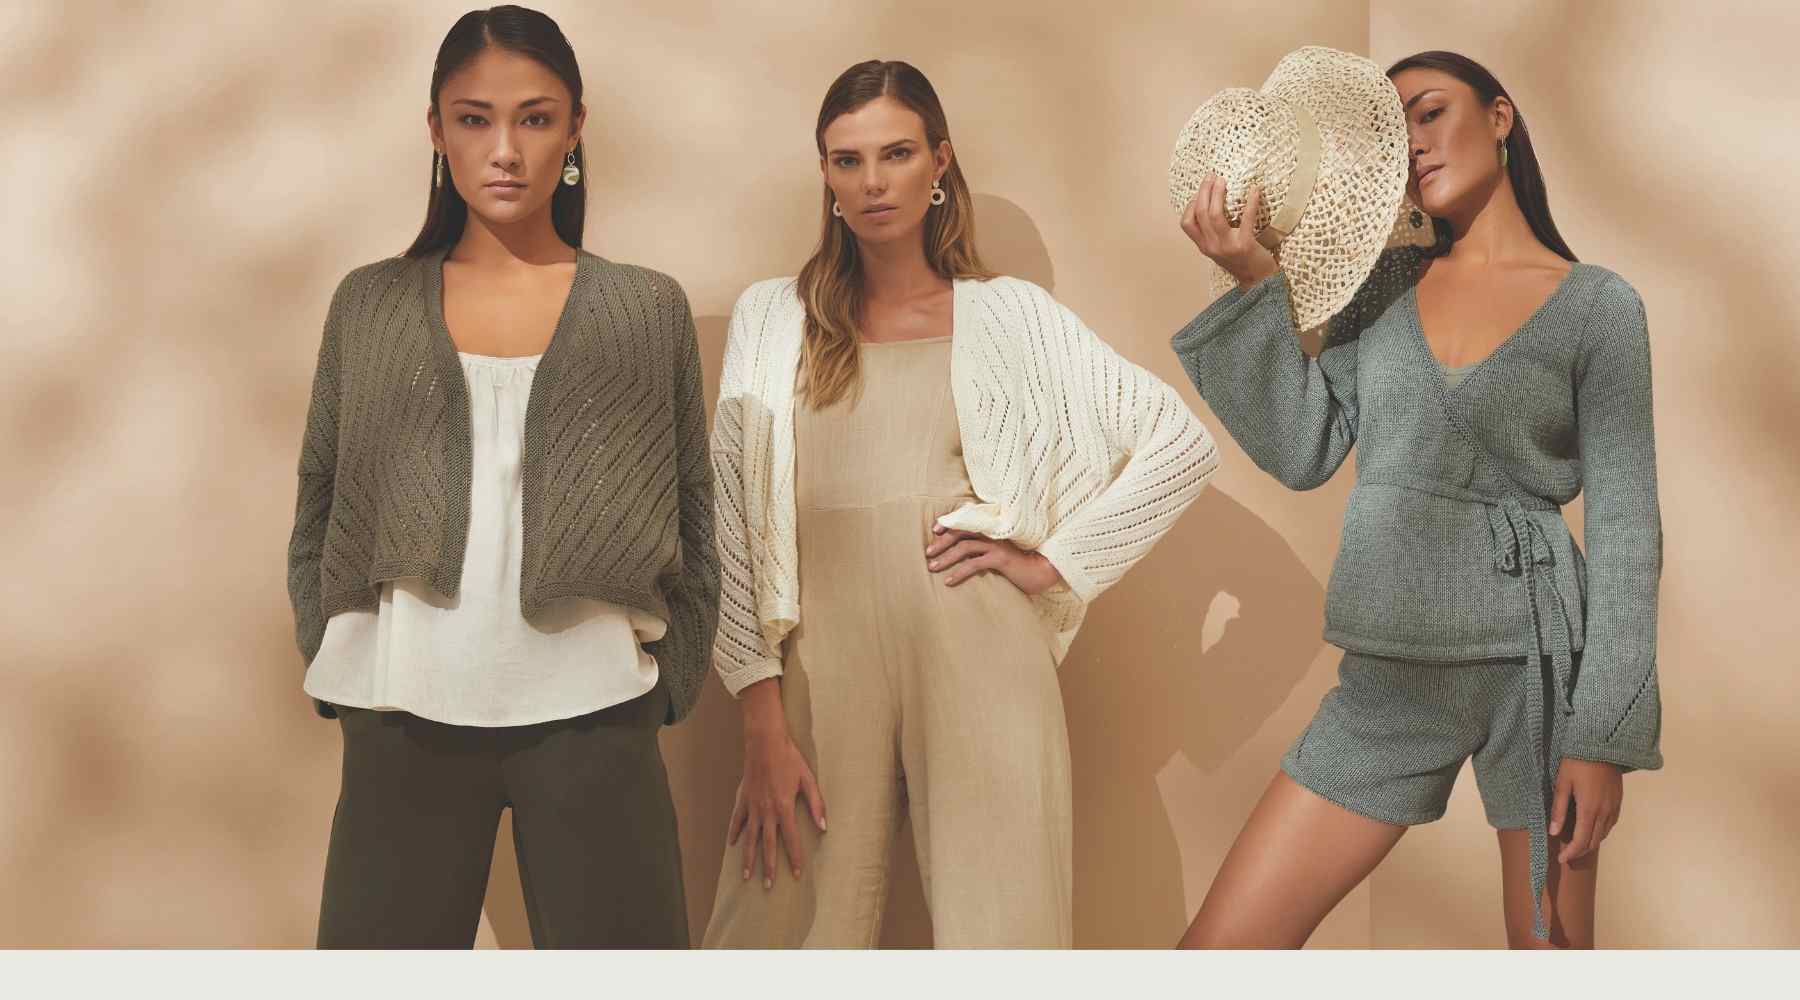 Knitting and Fashion trends for Spring Summer 2021